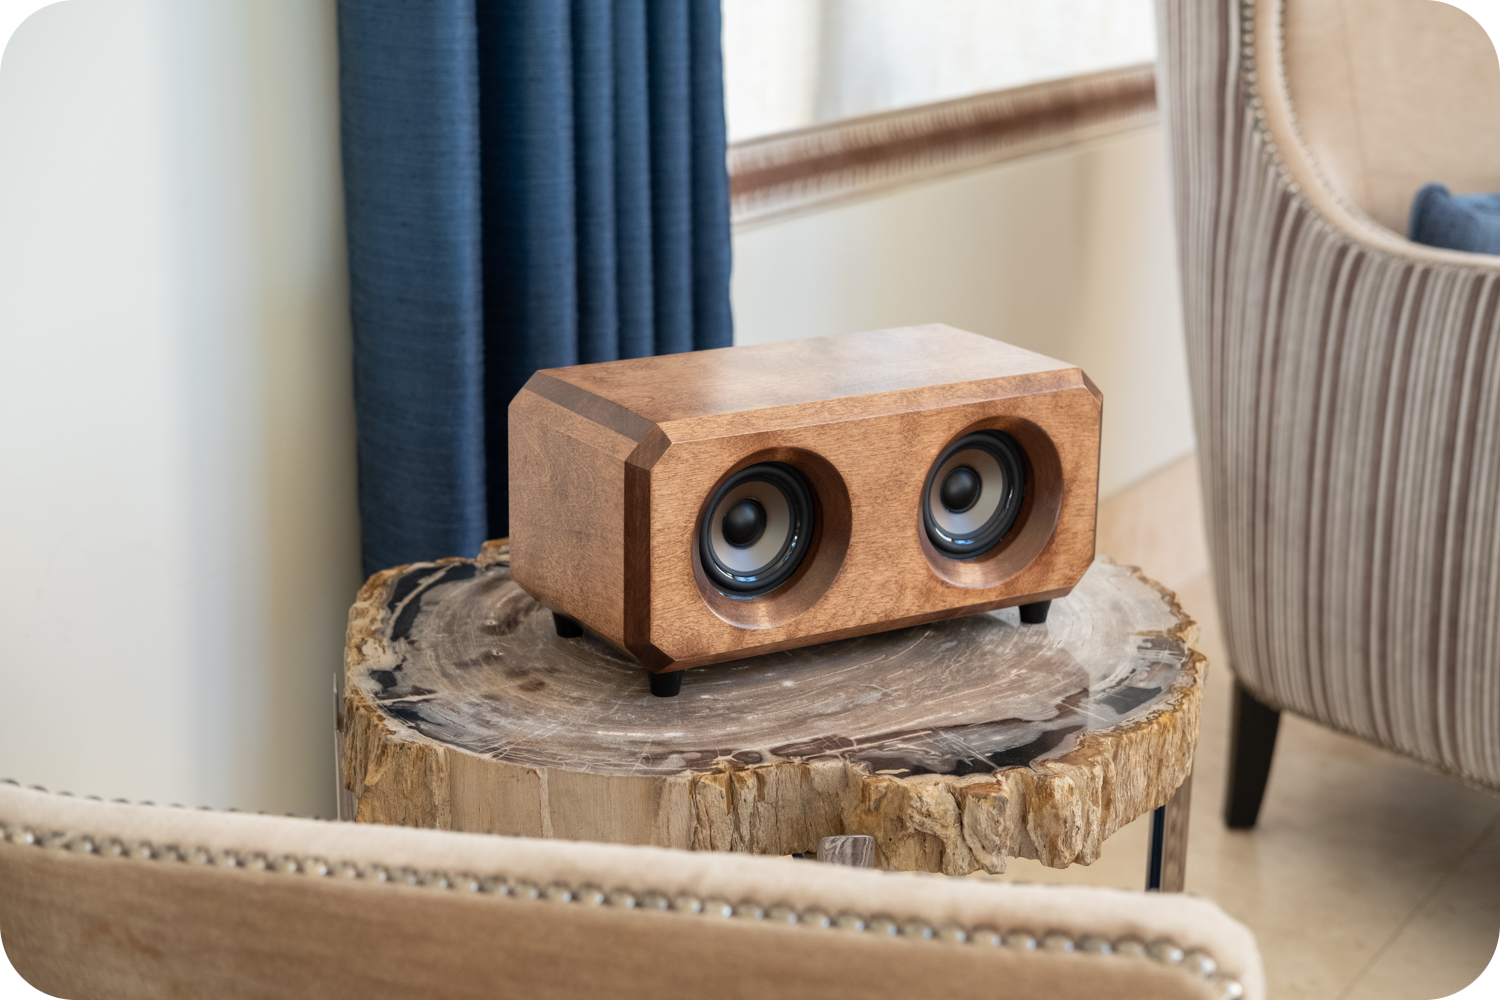 Bluetooth speakers that are similar and comparable to Bose, Sonos and Wharfdale is Riverwood Acoustics